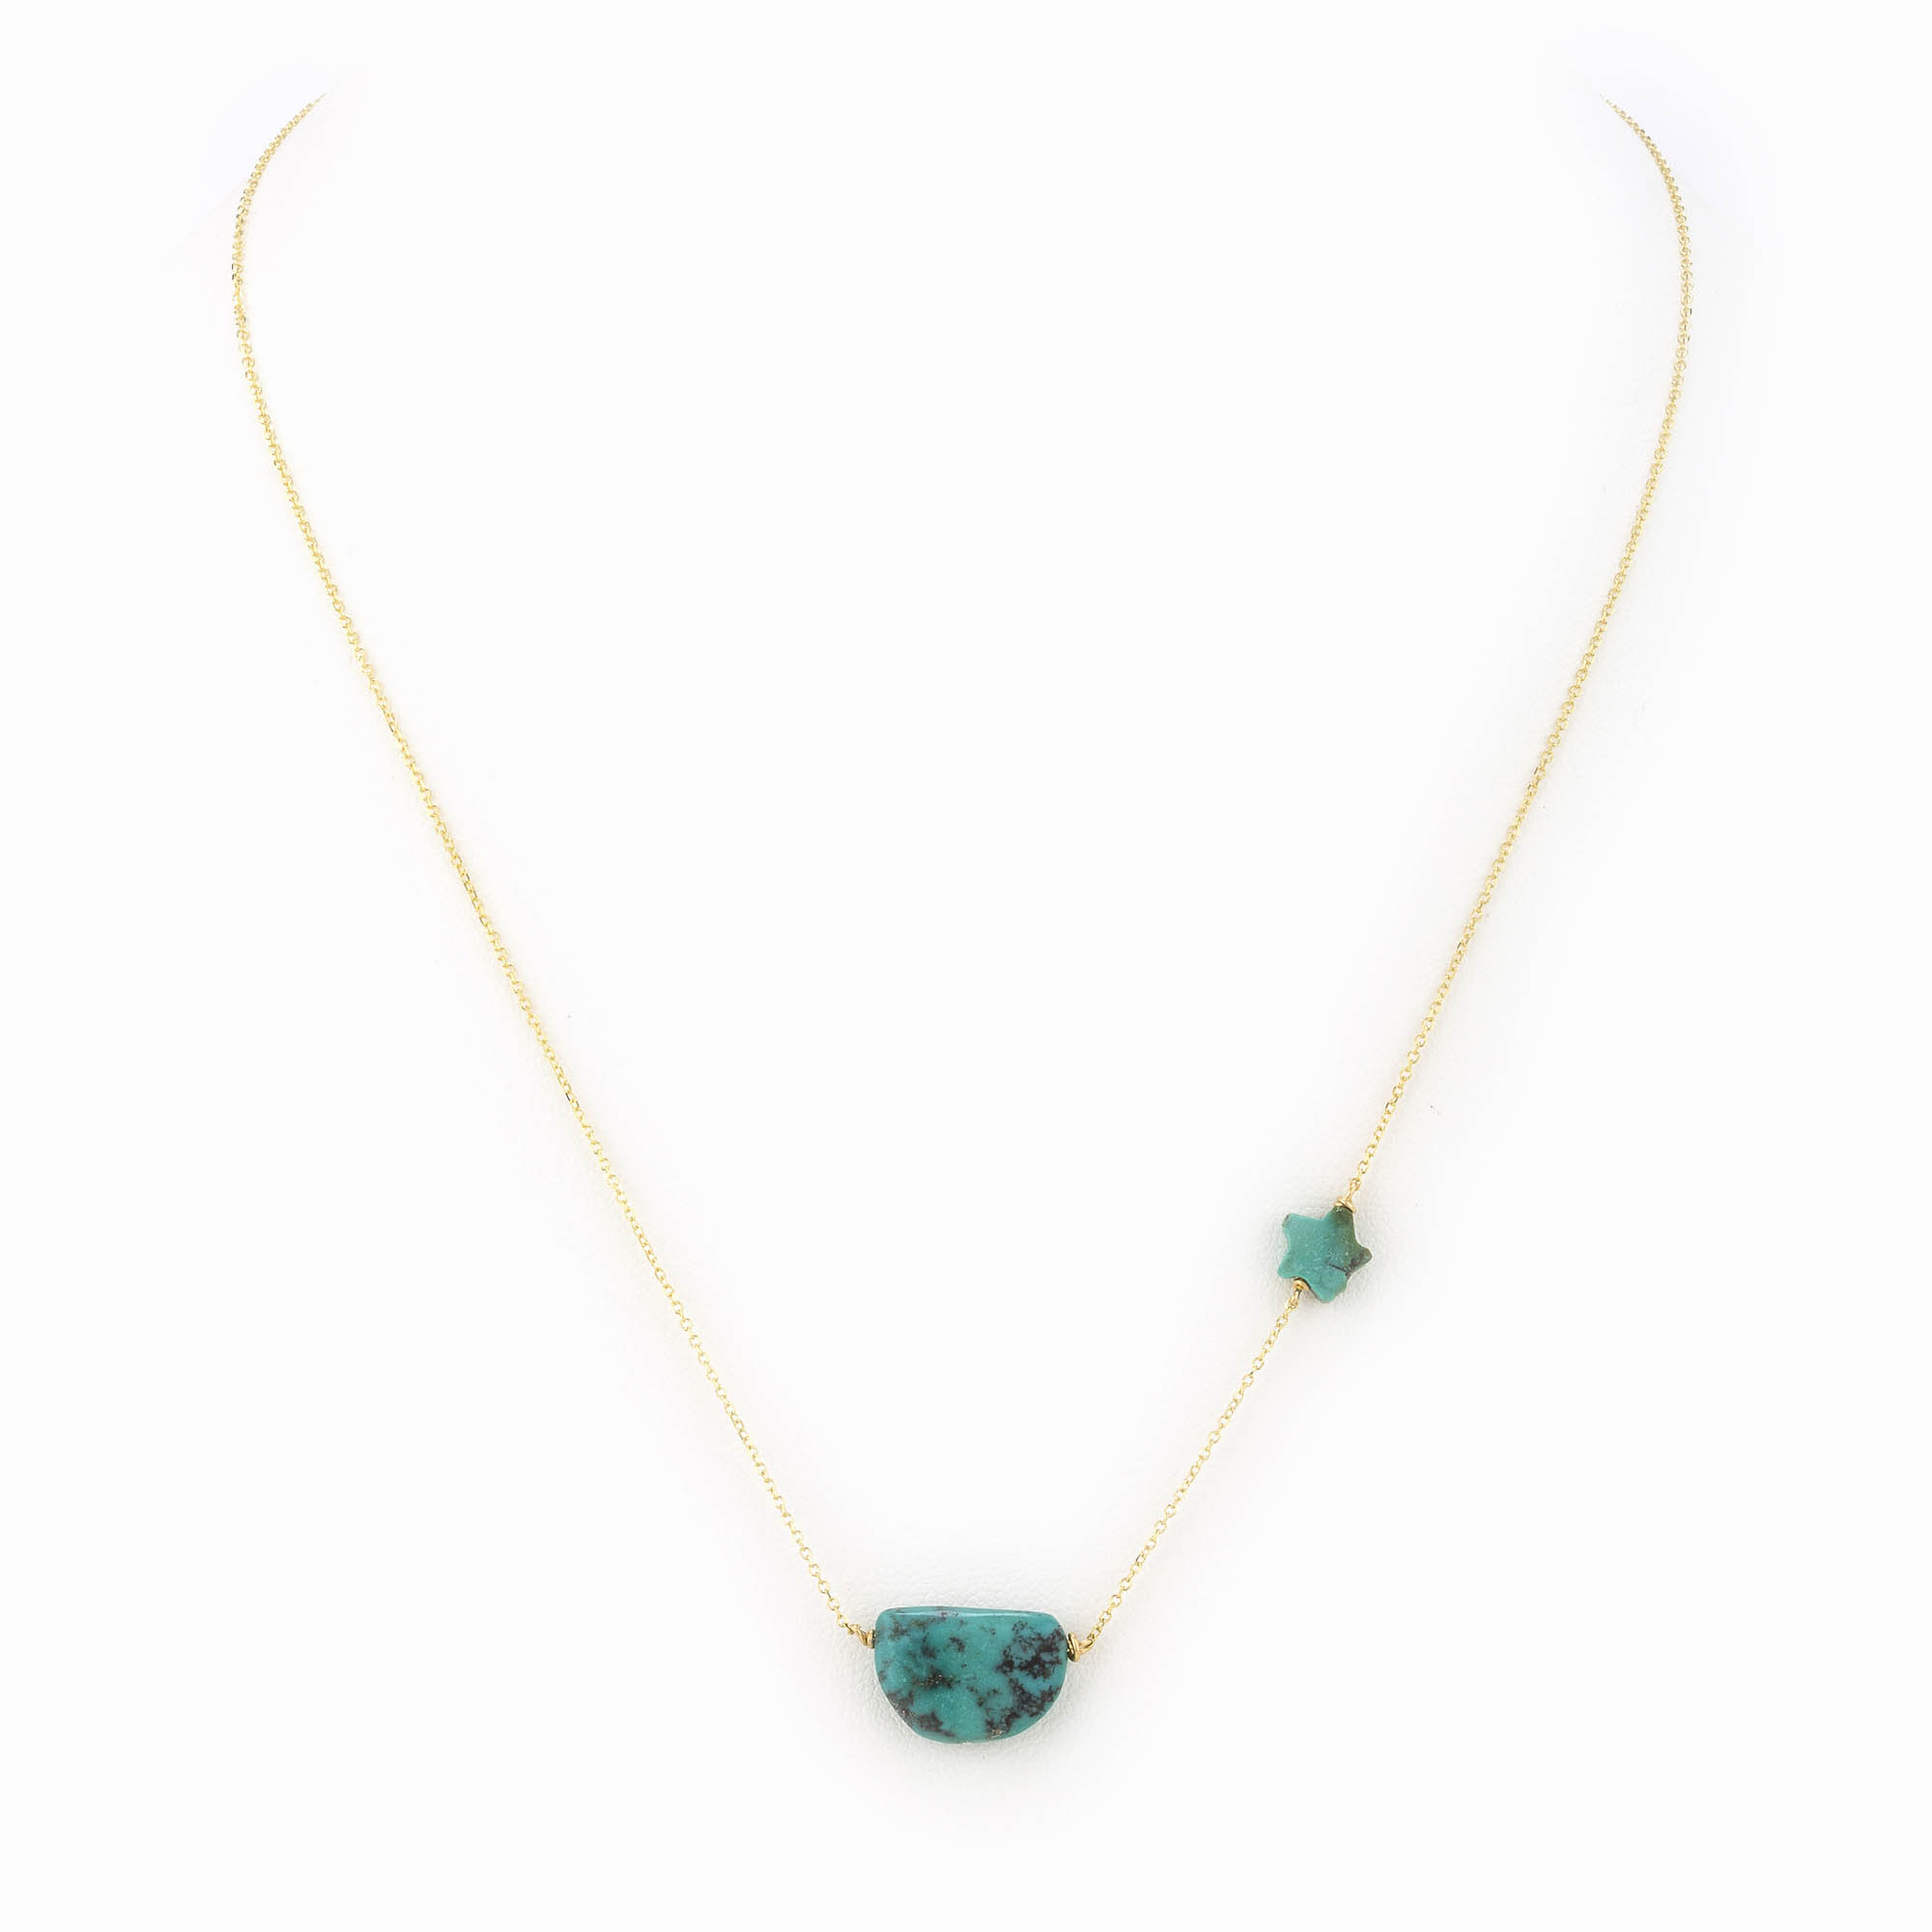 Featured image for “Blue Sky Gold Necklace”